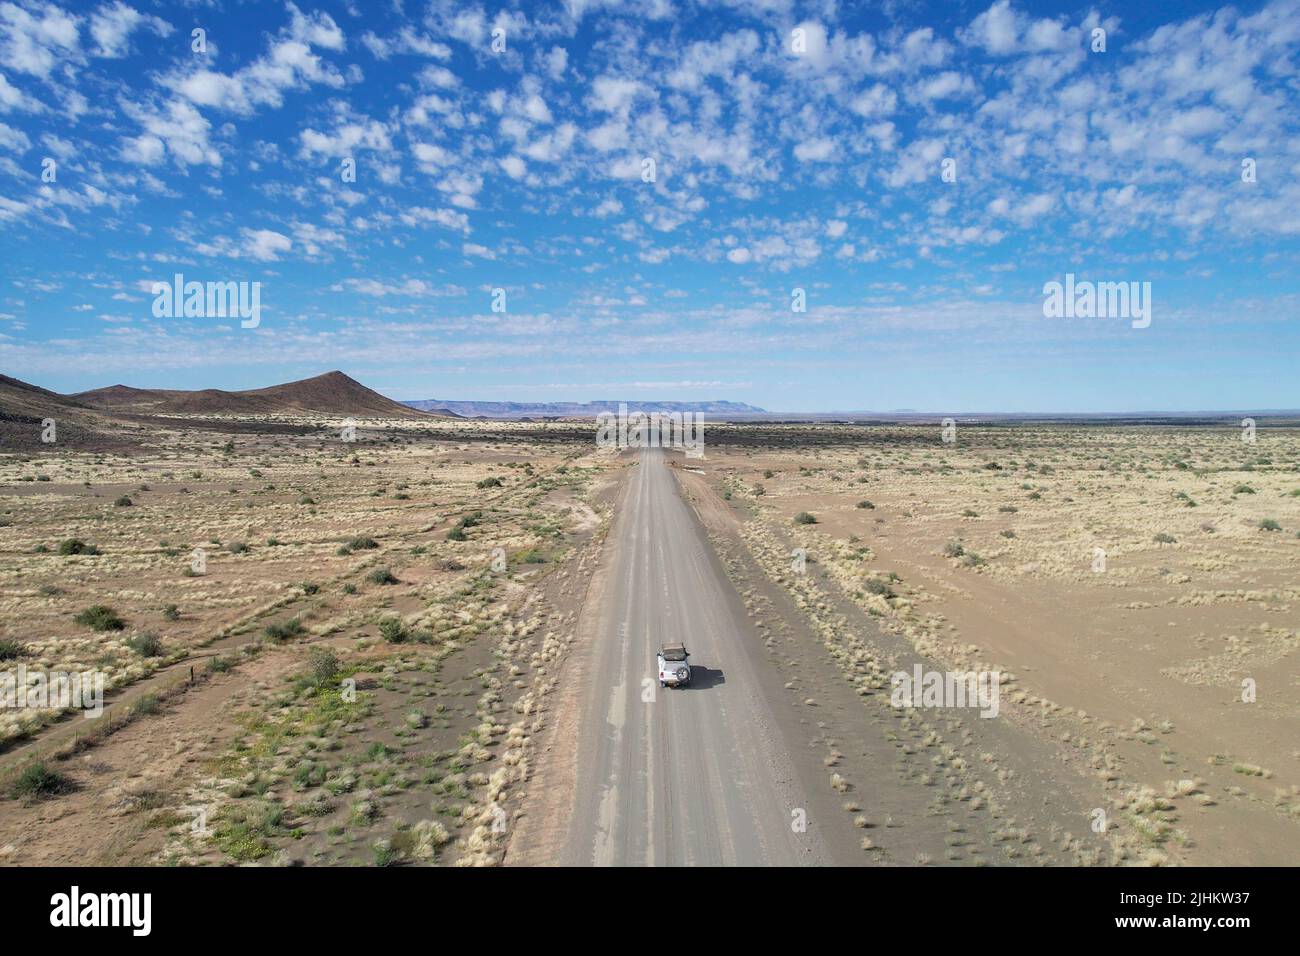 A 4x4 on a gravel road in Namibia Africa Stock Photo